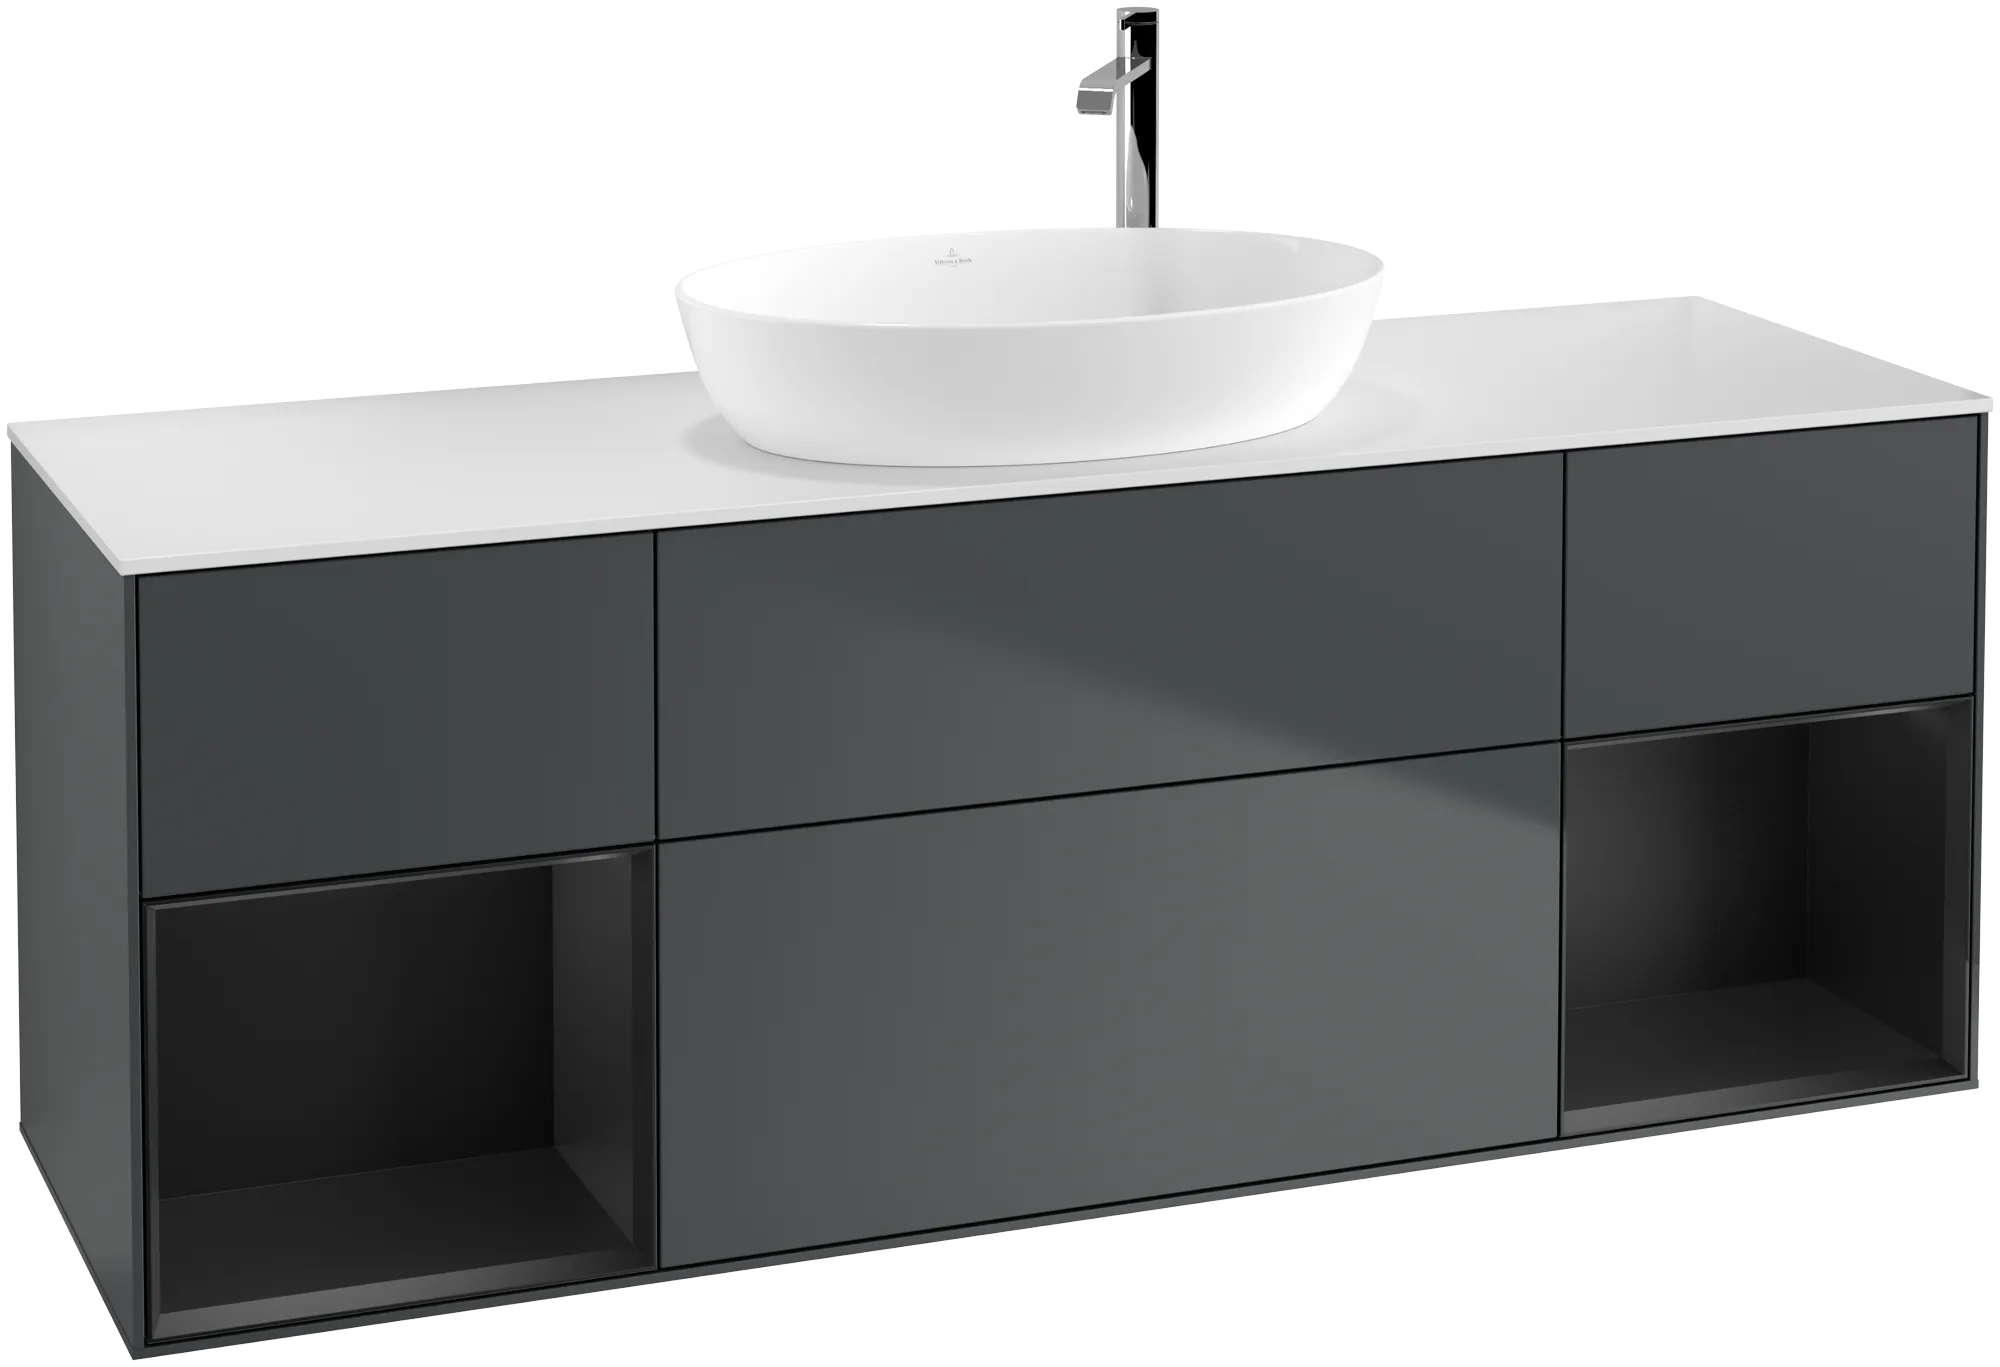 Picture of VILLEROY BOCH Finion Vanity unit, with lighting, 4 pull-out compartments, 1600 x 603 x 501 mm, Midnight Blue Matt Lacquer / Black Matt Lacquer / Glass White Matt #G981PDHG